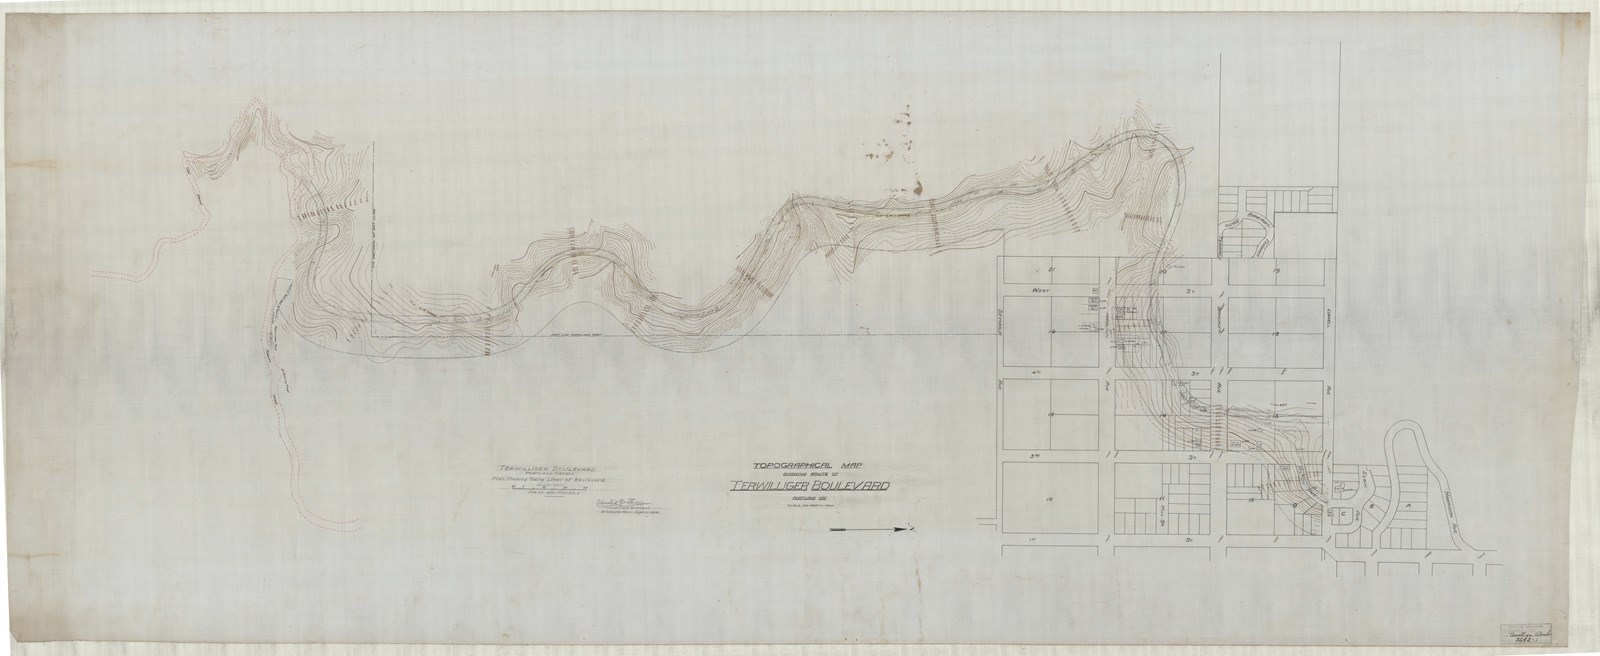 Pencil plan of curving road leading to city streets with topographical lines around road